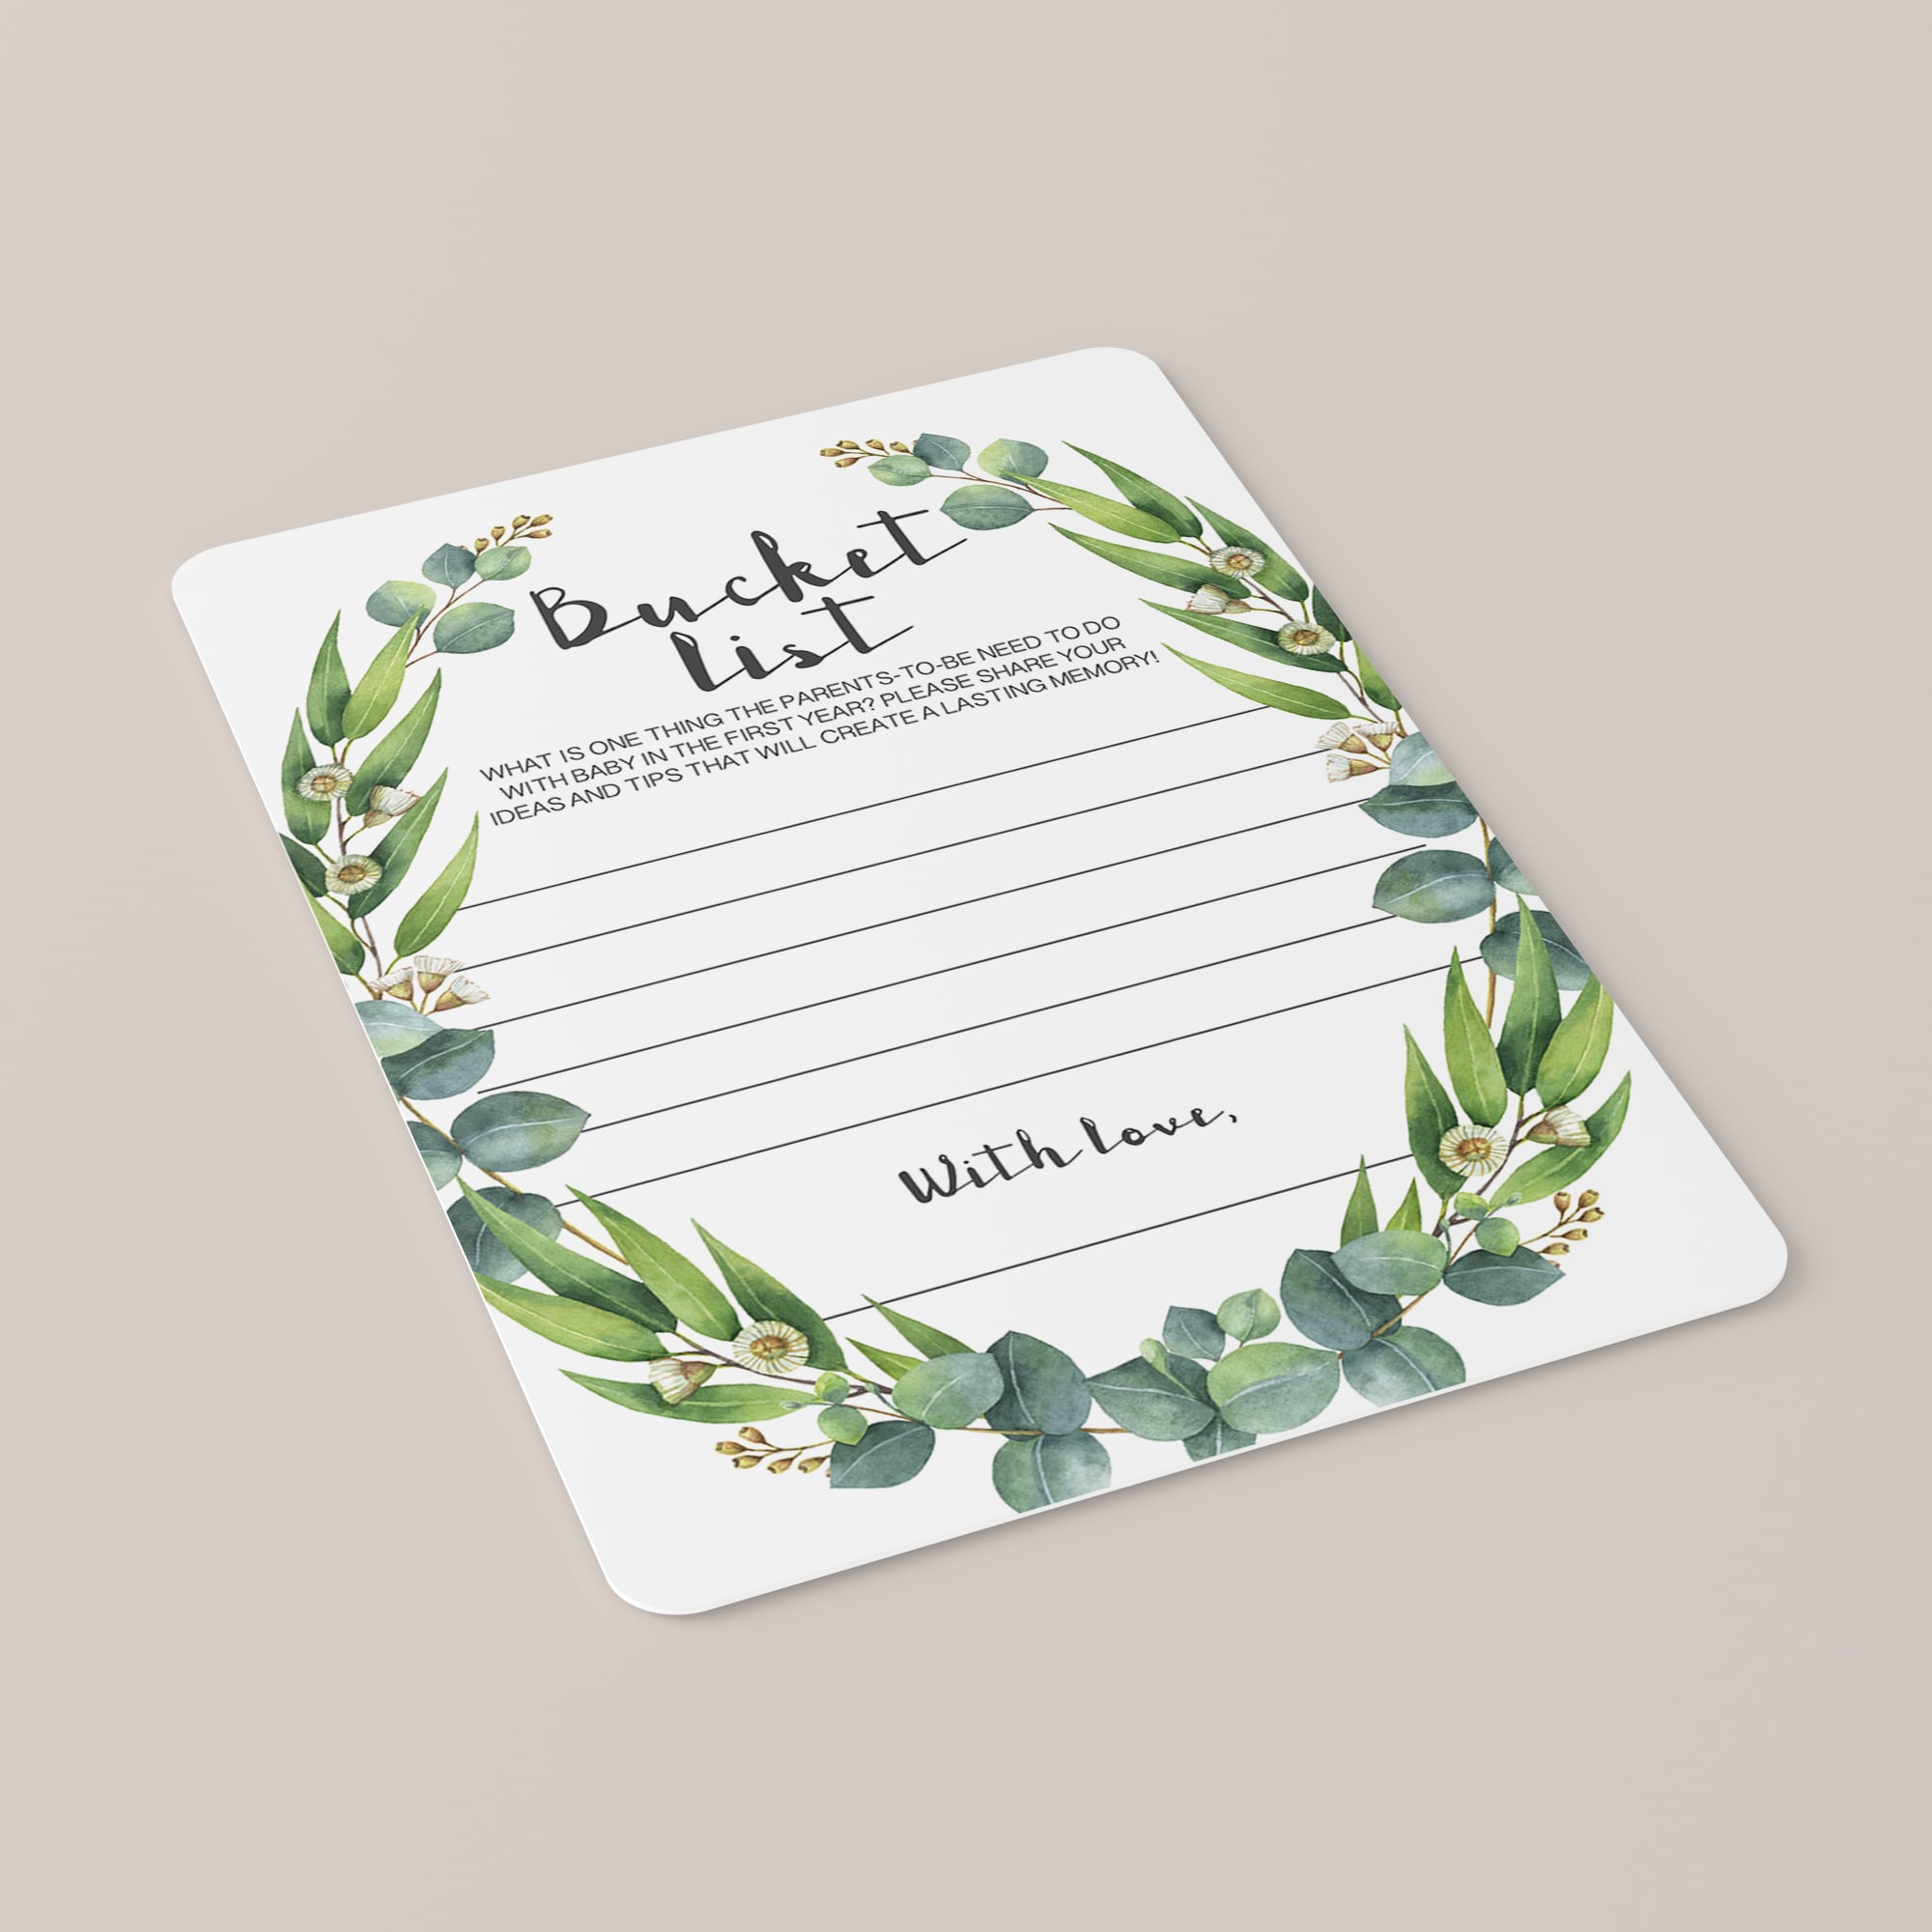 Printable bucket list cards with green wreath instant download by LittleSizzle